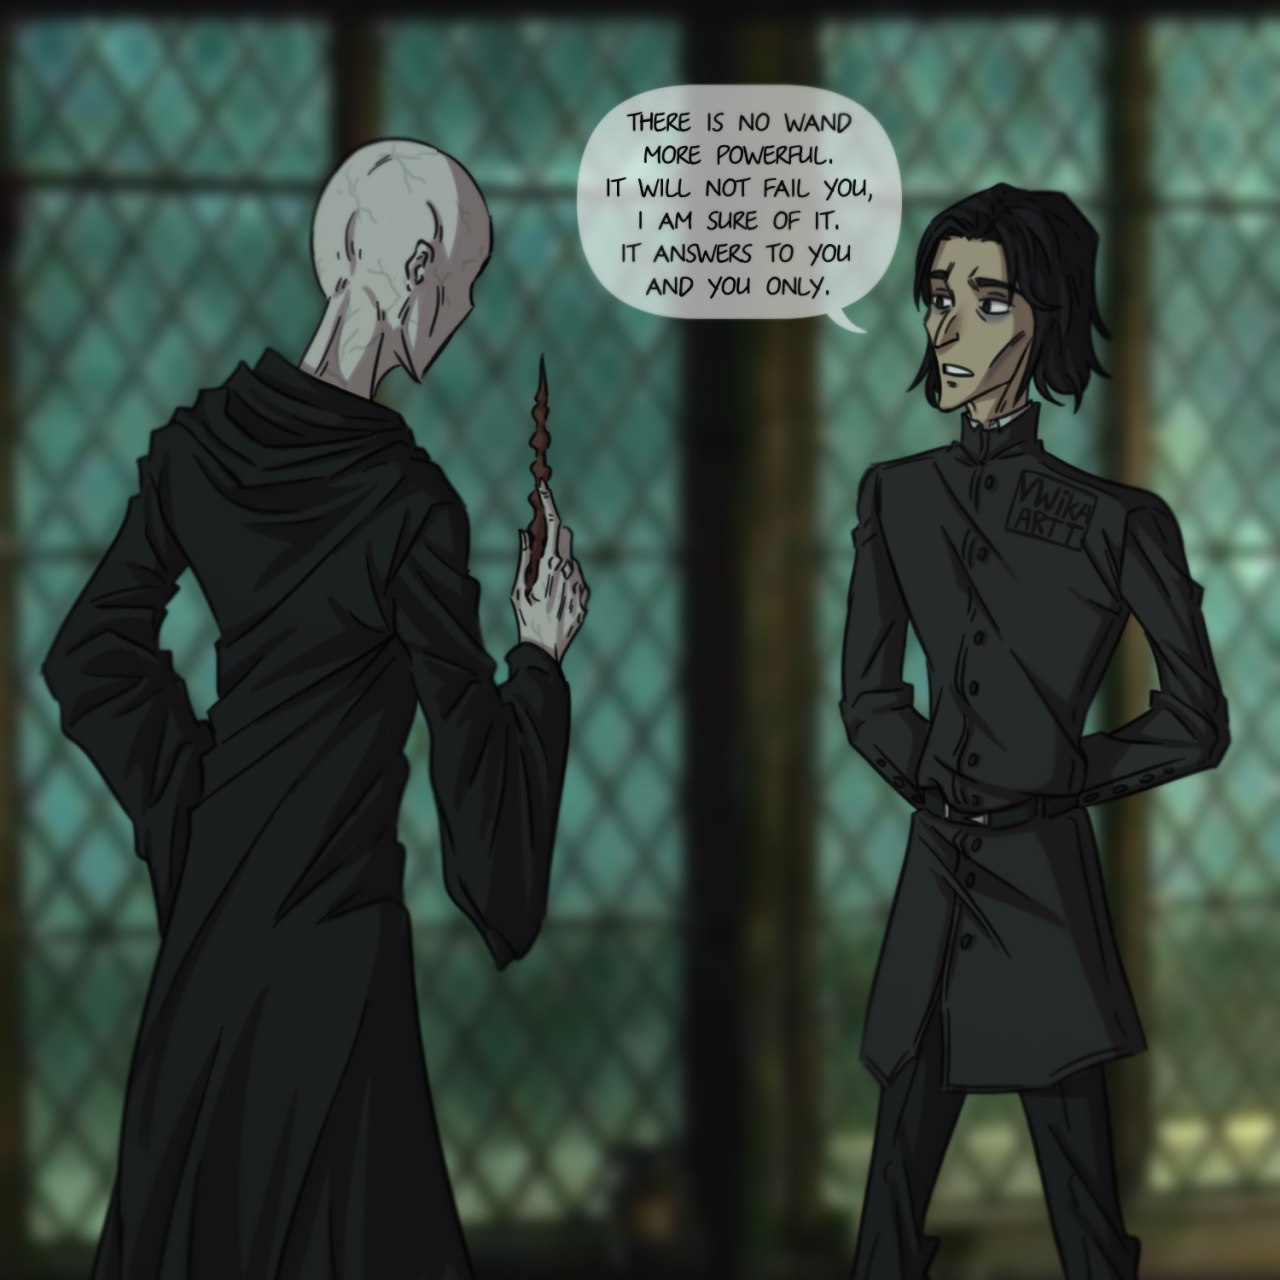 — Snape and Voldemort